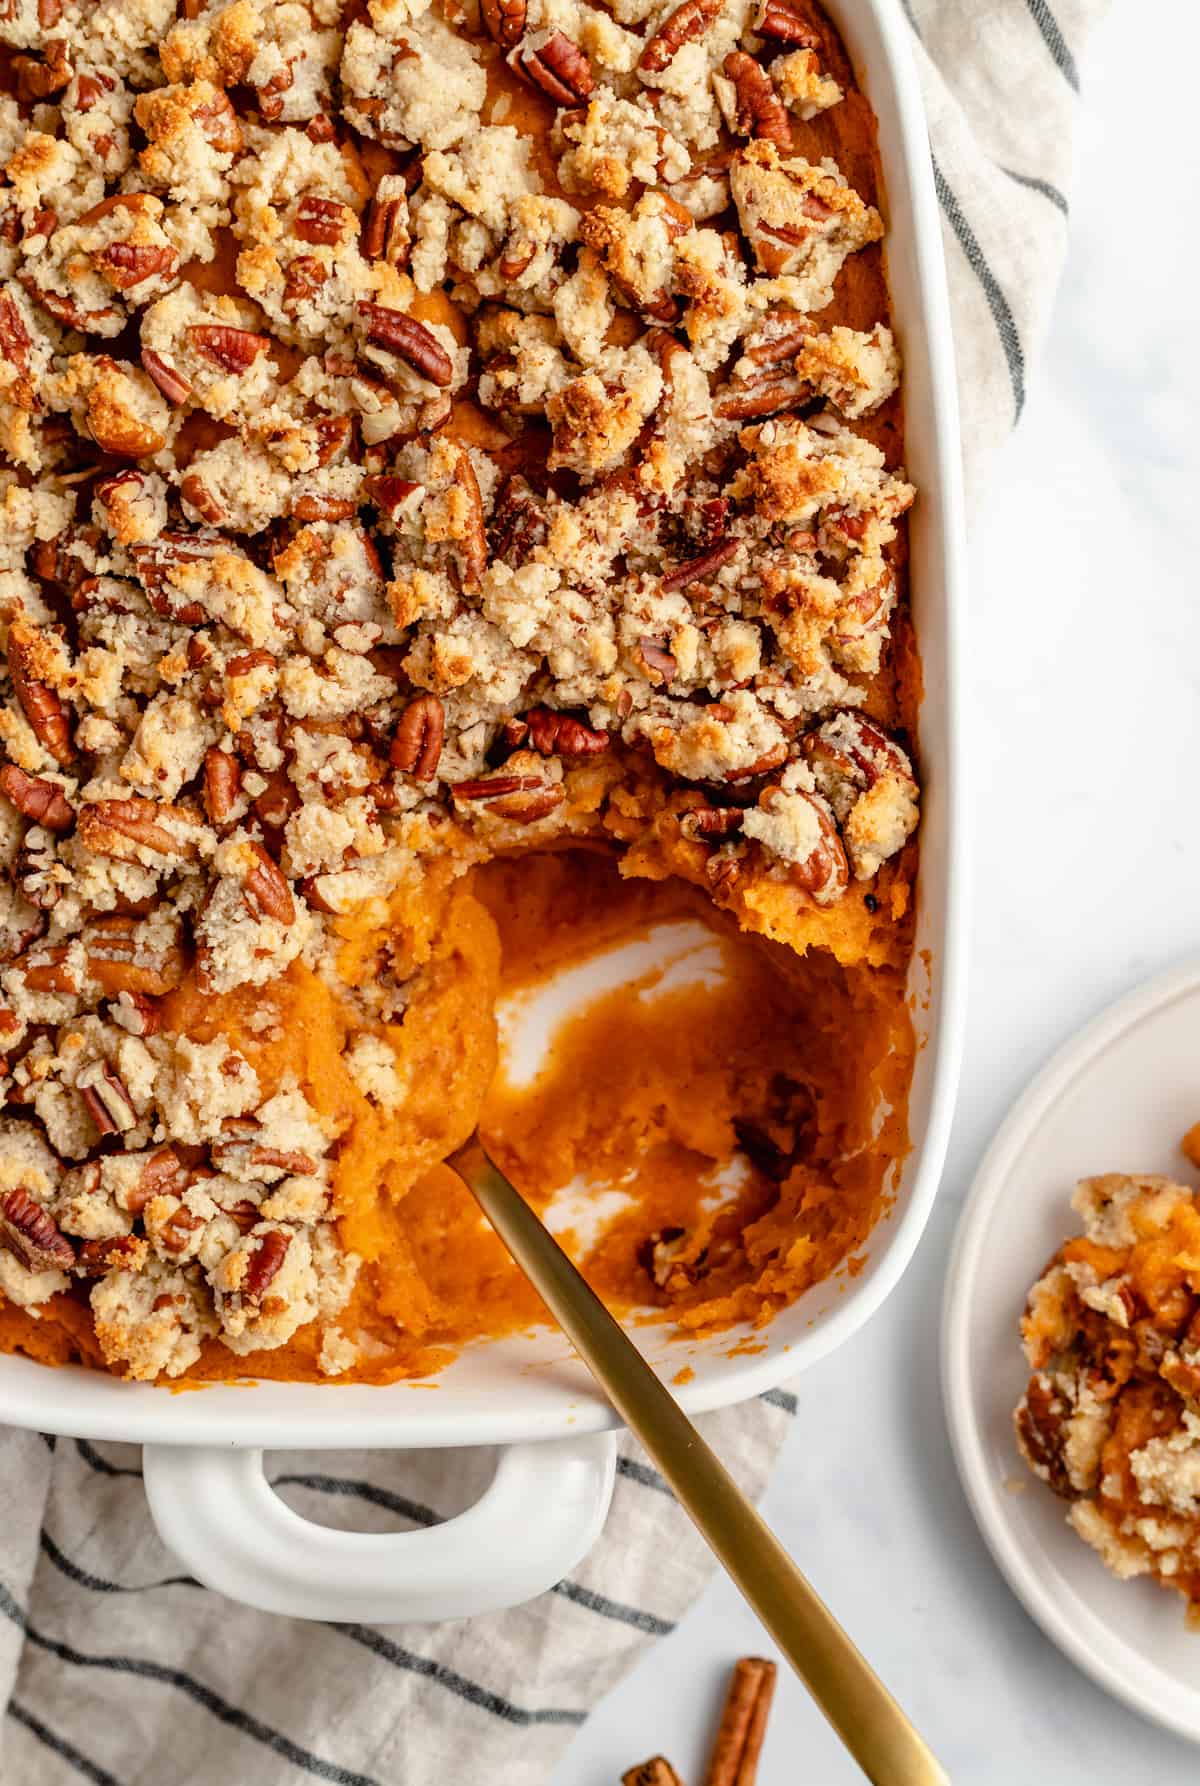 Spoon in sweet potato casserole with a scoop taken out in a plate in the corner.